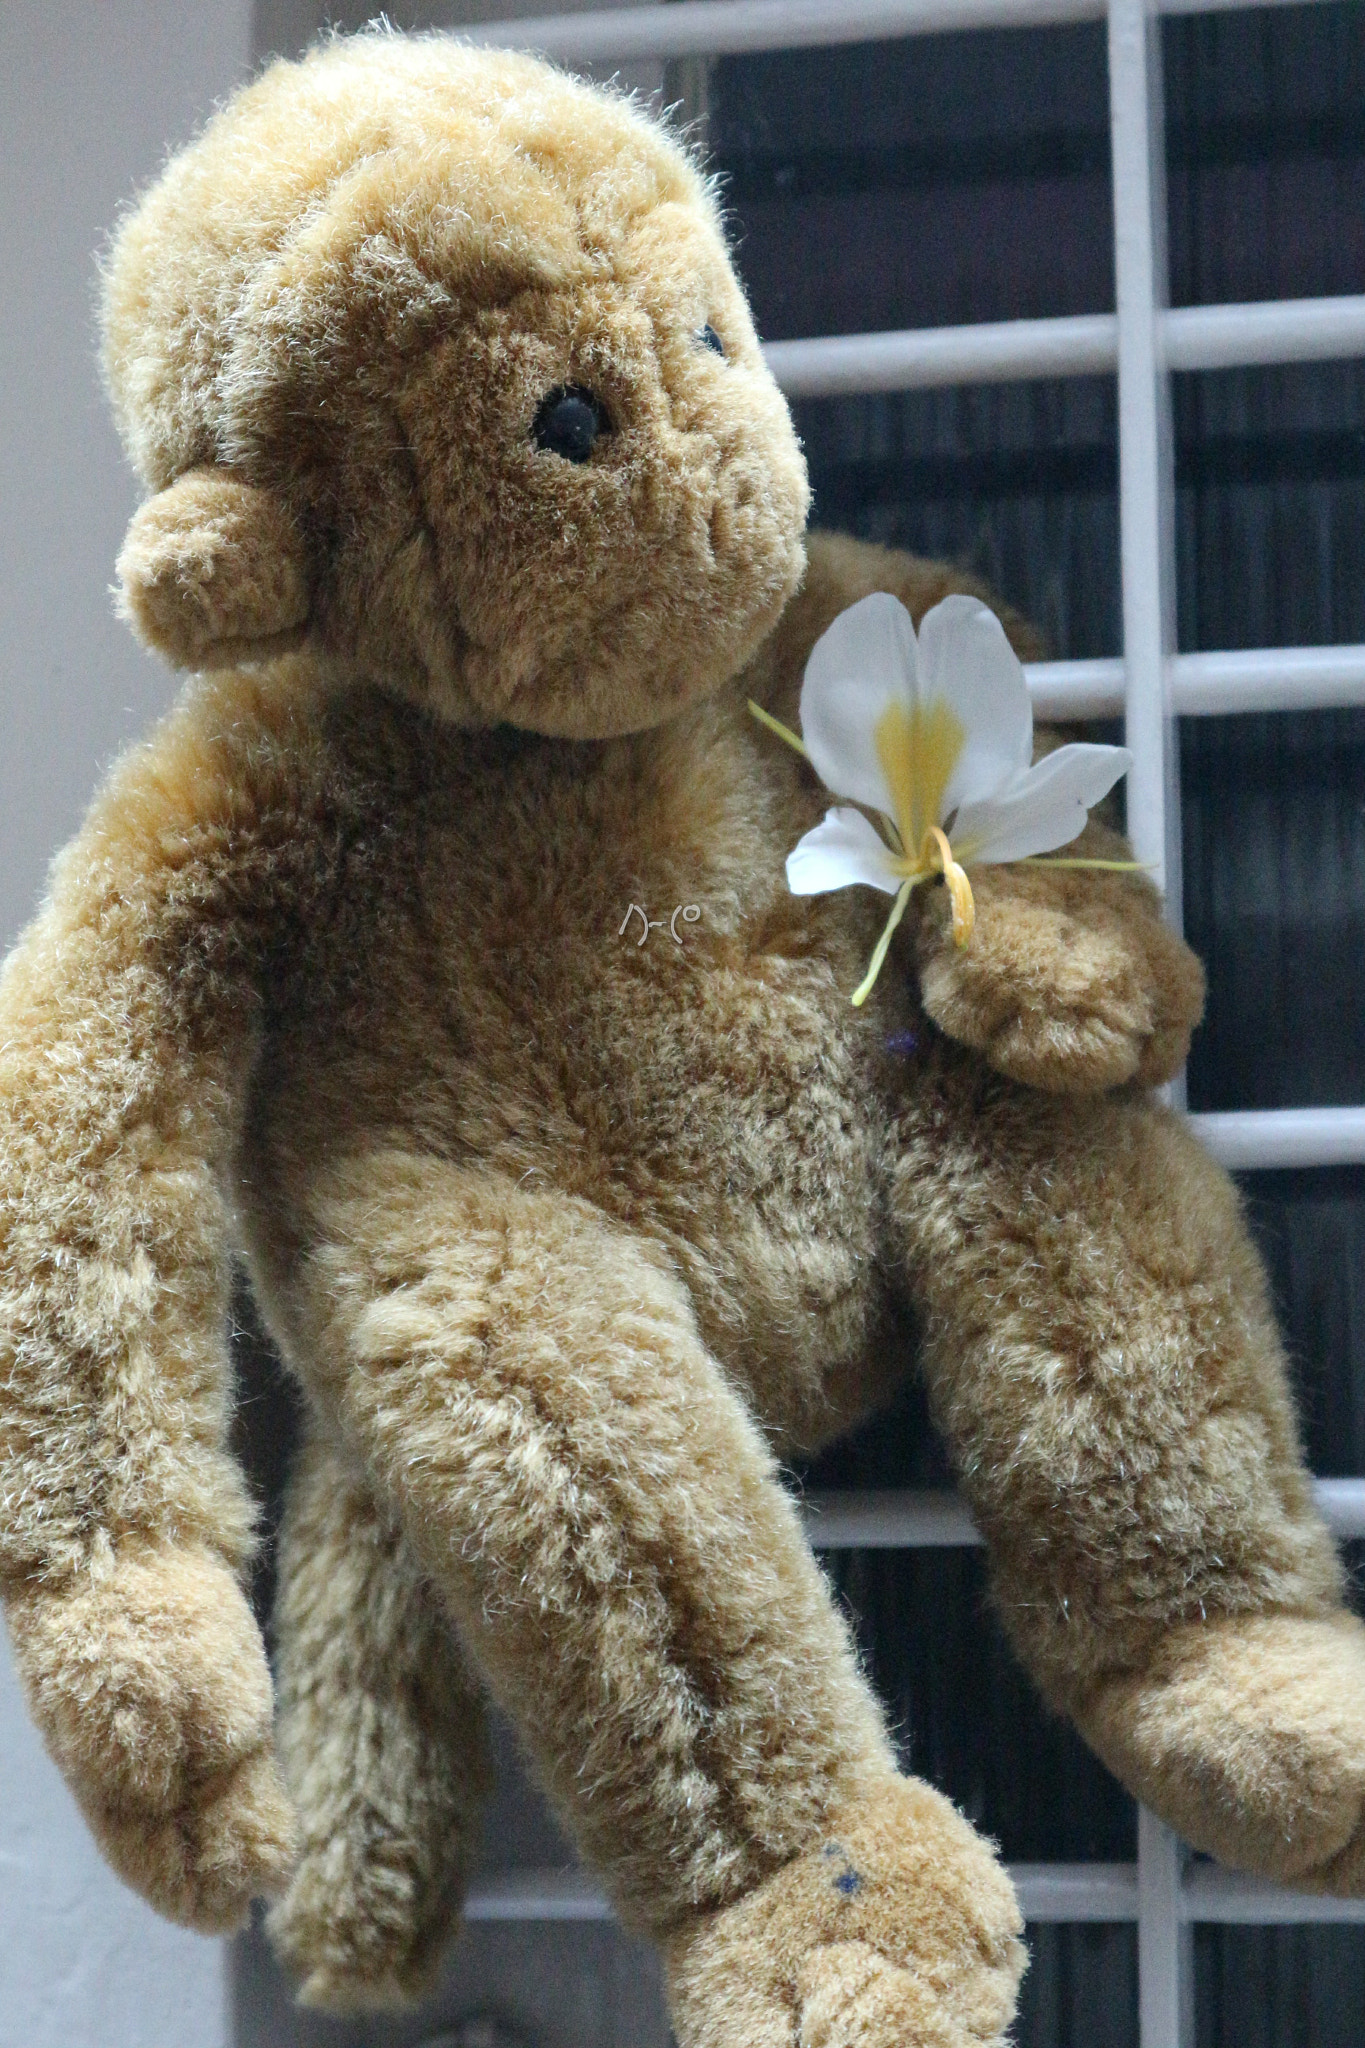 Canon EOS M10 sample photo. Flower and stuffed toy photography